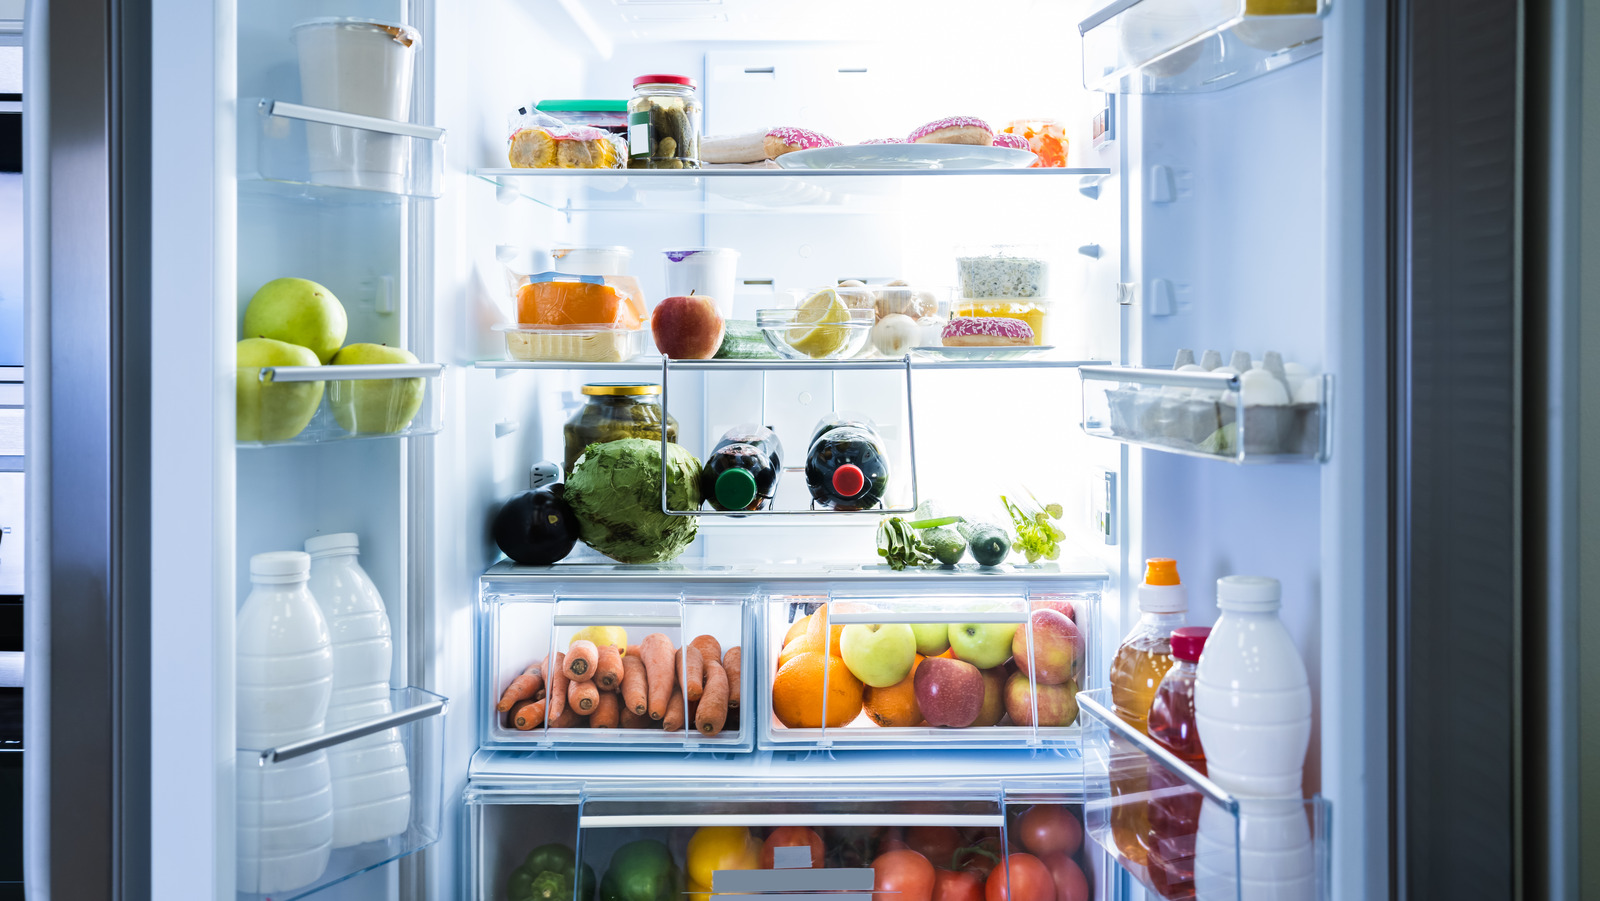 Cleaning your refrigerator after a food recall